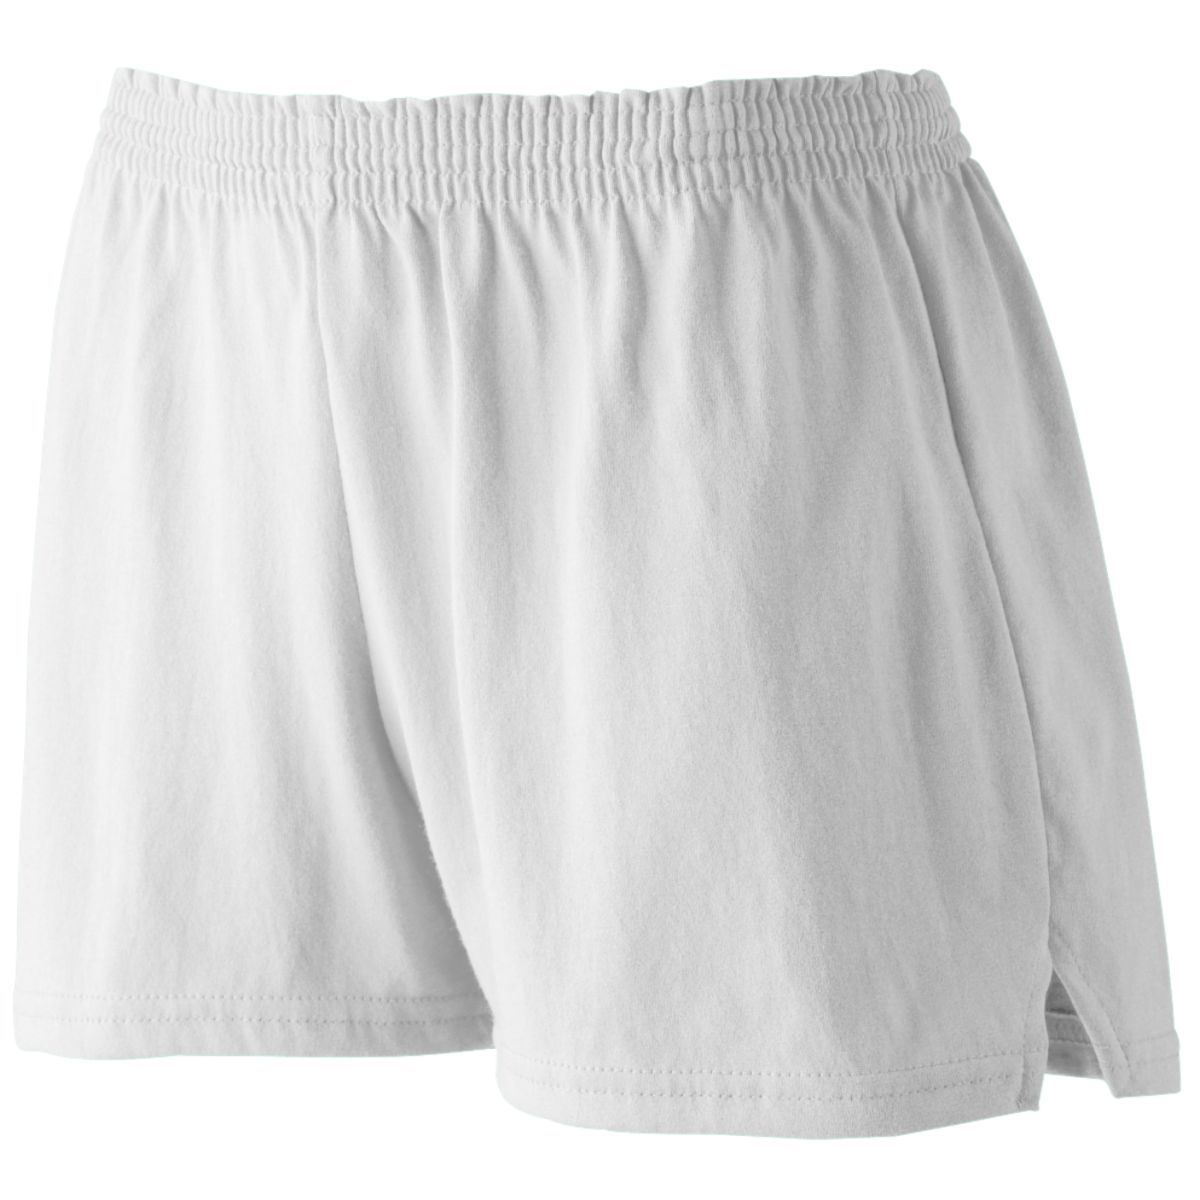 Augusta Sportswear Girls Jersey Shorts in White  -Part of the Girls, Augusta-Products, Girls-Shorts product lines at KanaleyCreations.com